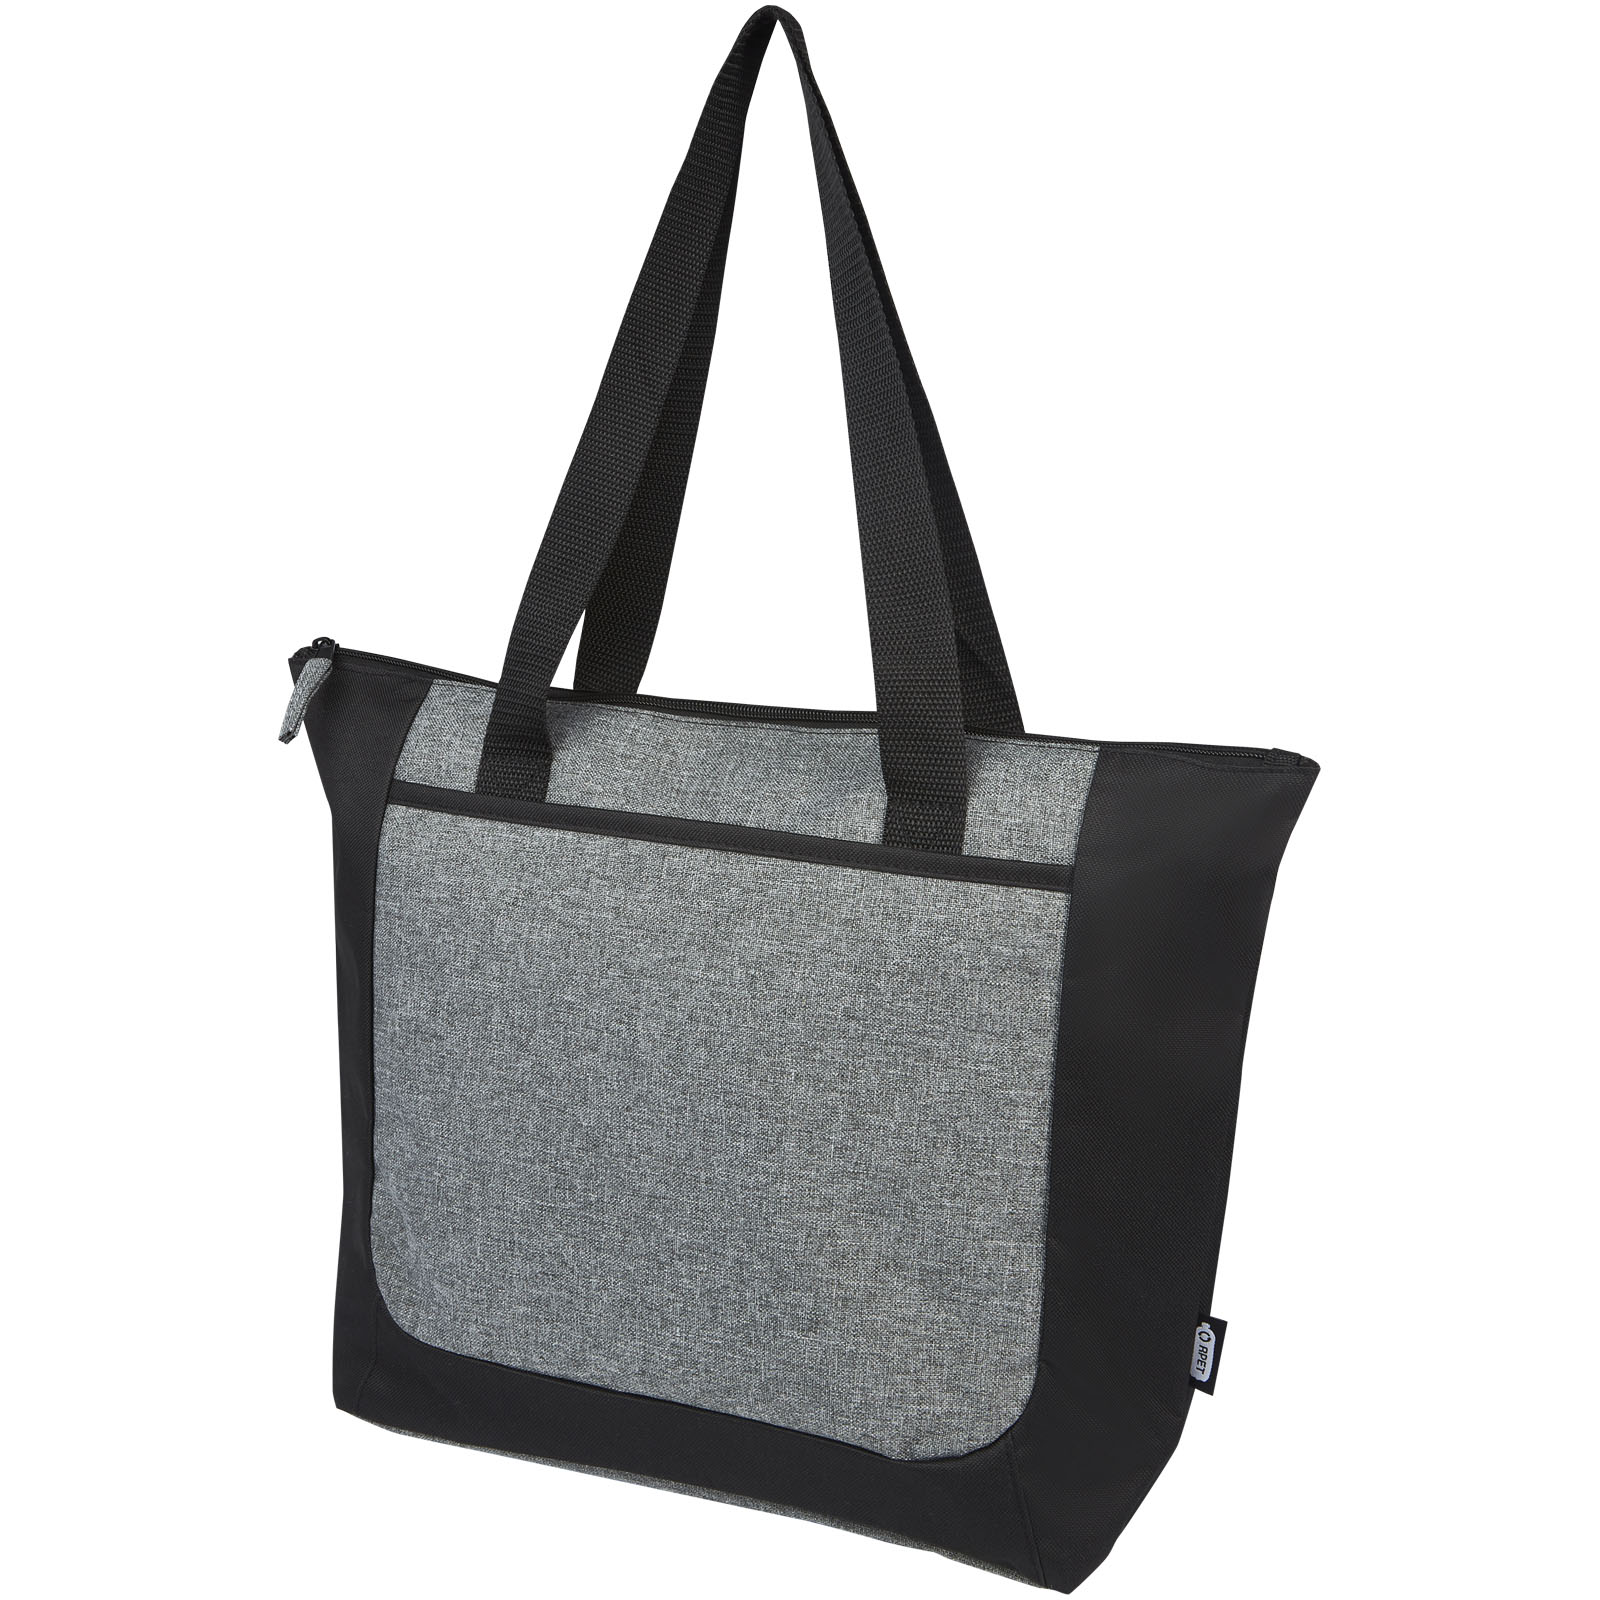 Bags - Reclaim GRS recycled two-tone zippered tote bag 15L